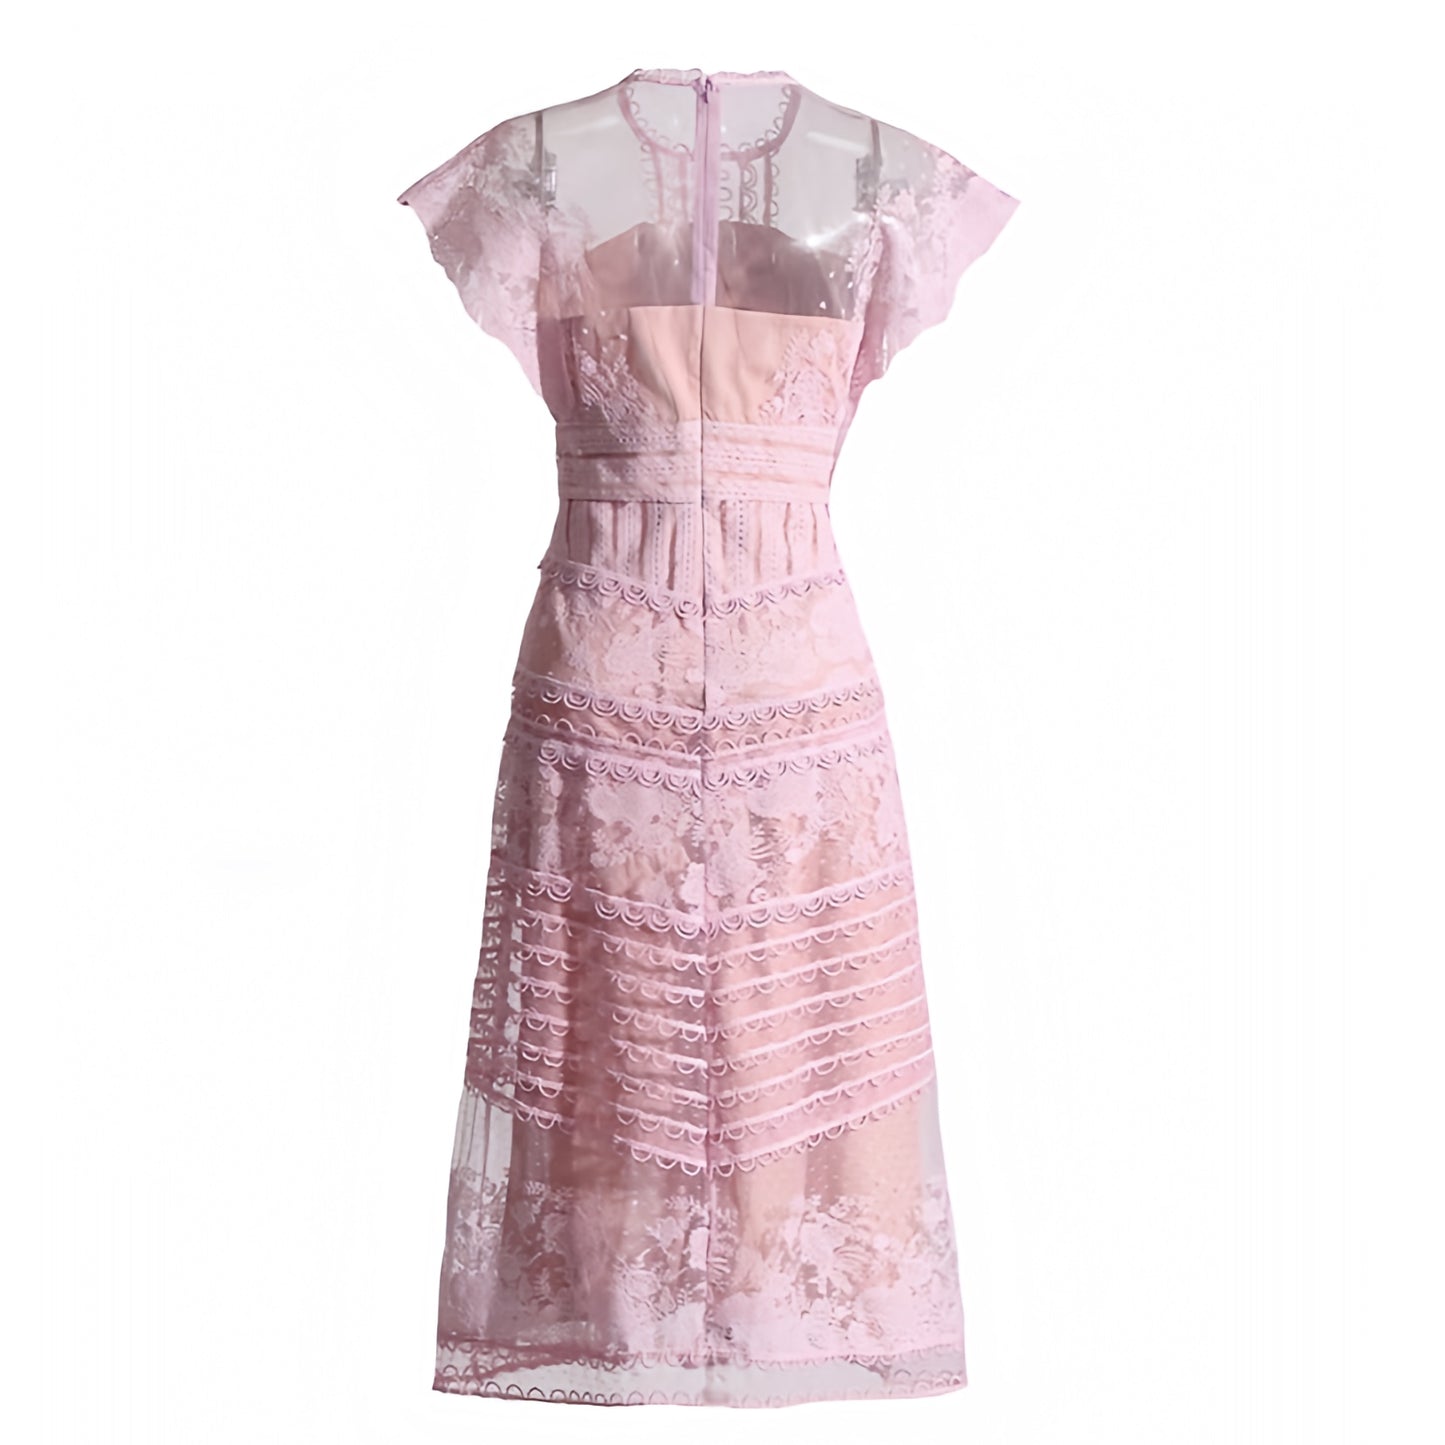 floral-print-light-pink-flower-patterned-lace-embroidered-mesh-slim-fit-bodycon-fitted-waist-round-neck-short-sleeve-midi-long-maxi-dress-evening-ball-gown-couture-women-ladies-chic-trendy-spring-2024-summer-elegant-semi-formal-feminine-classy-gala-prom-party-debutante-wedding-guest-fancy-preppy-style-sundress-altard-state-revolve-loveshackfancy-zimmerman-dupe